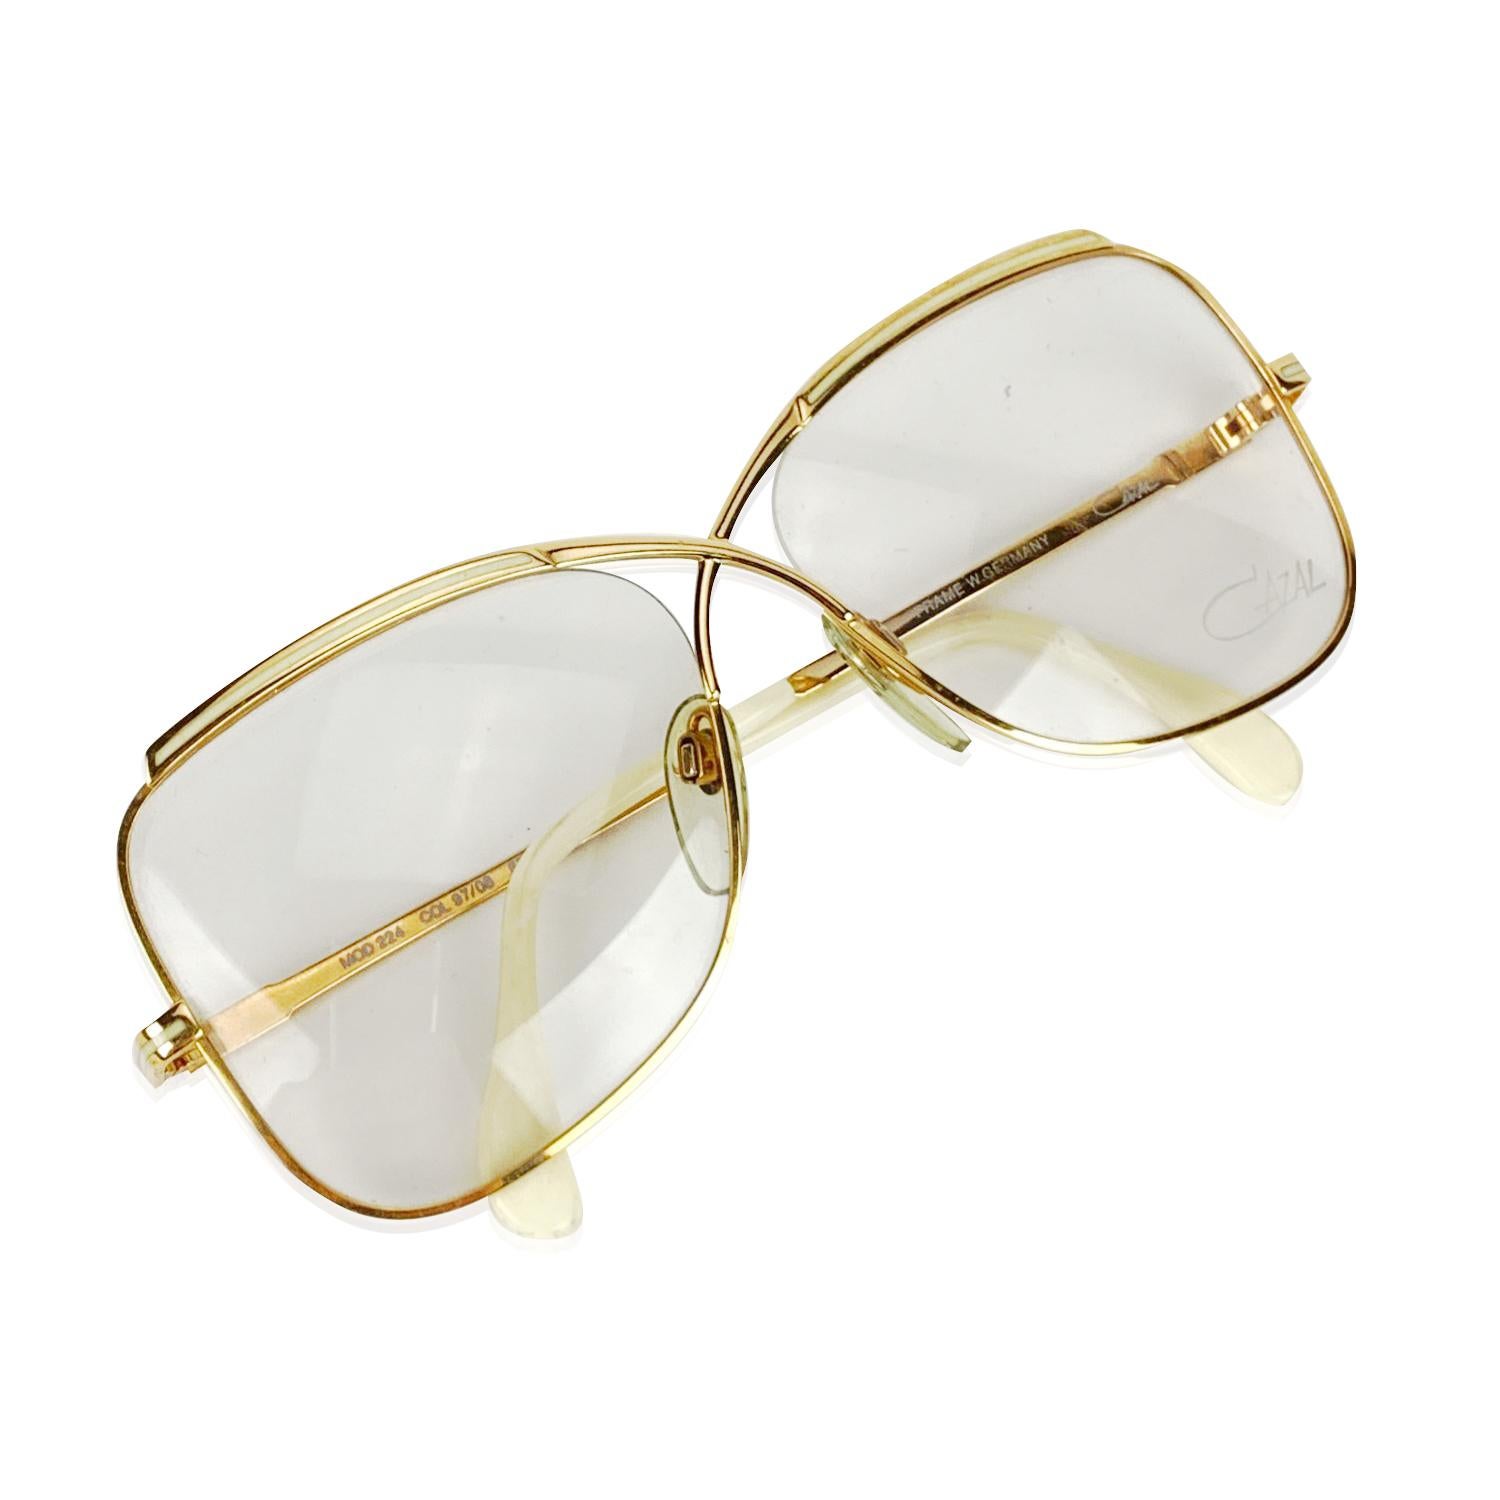 Rare, Vintage Eyeglasses by CAZAL Mod. 224, from the 80s. Made in West Germany. Gold metal frame. with ivory accents. Clear / trasparent DEMO lens, with CAZAL signature. Model refs: Mod. 224 - Col. 97/08 - 57/14 - 130




Details

MATERIAL: